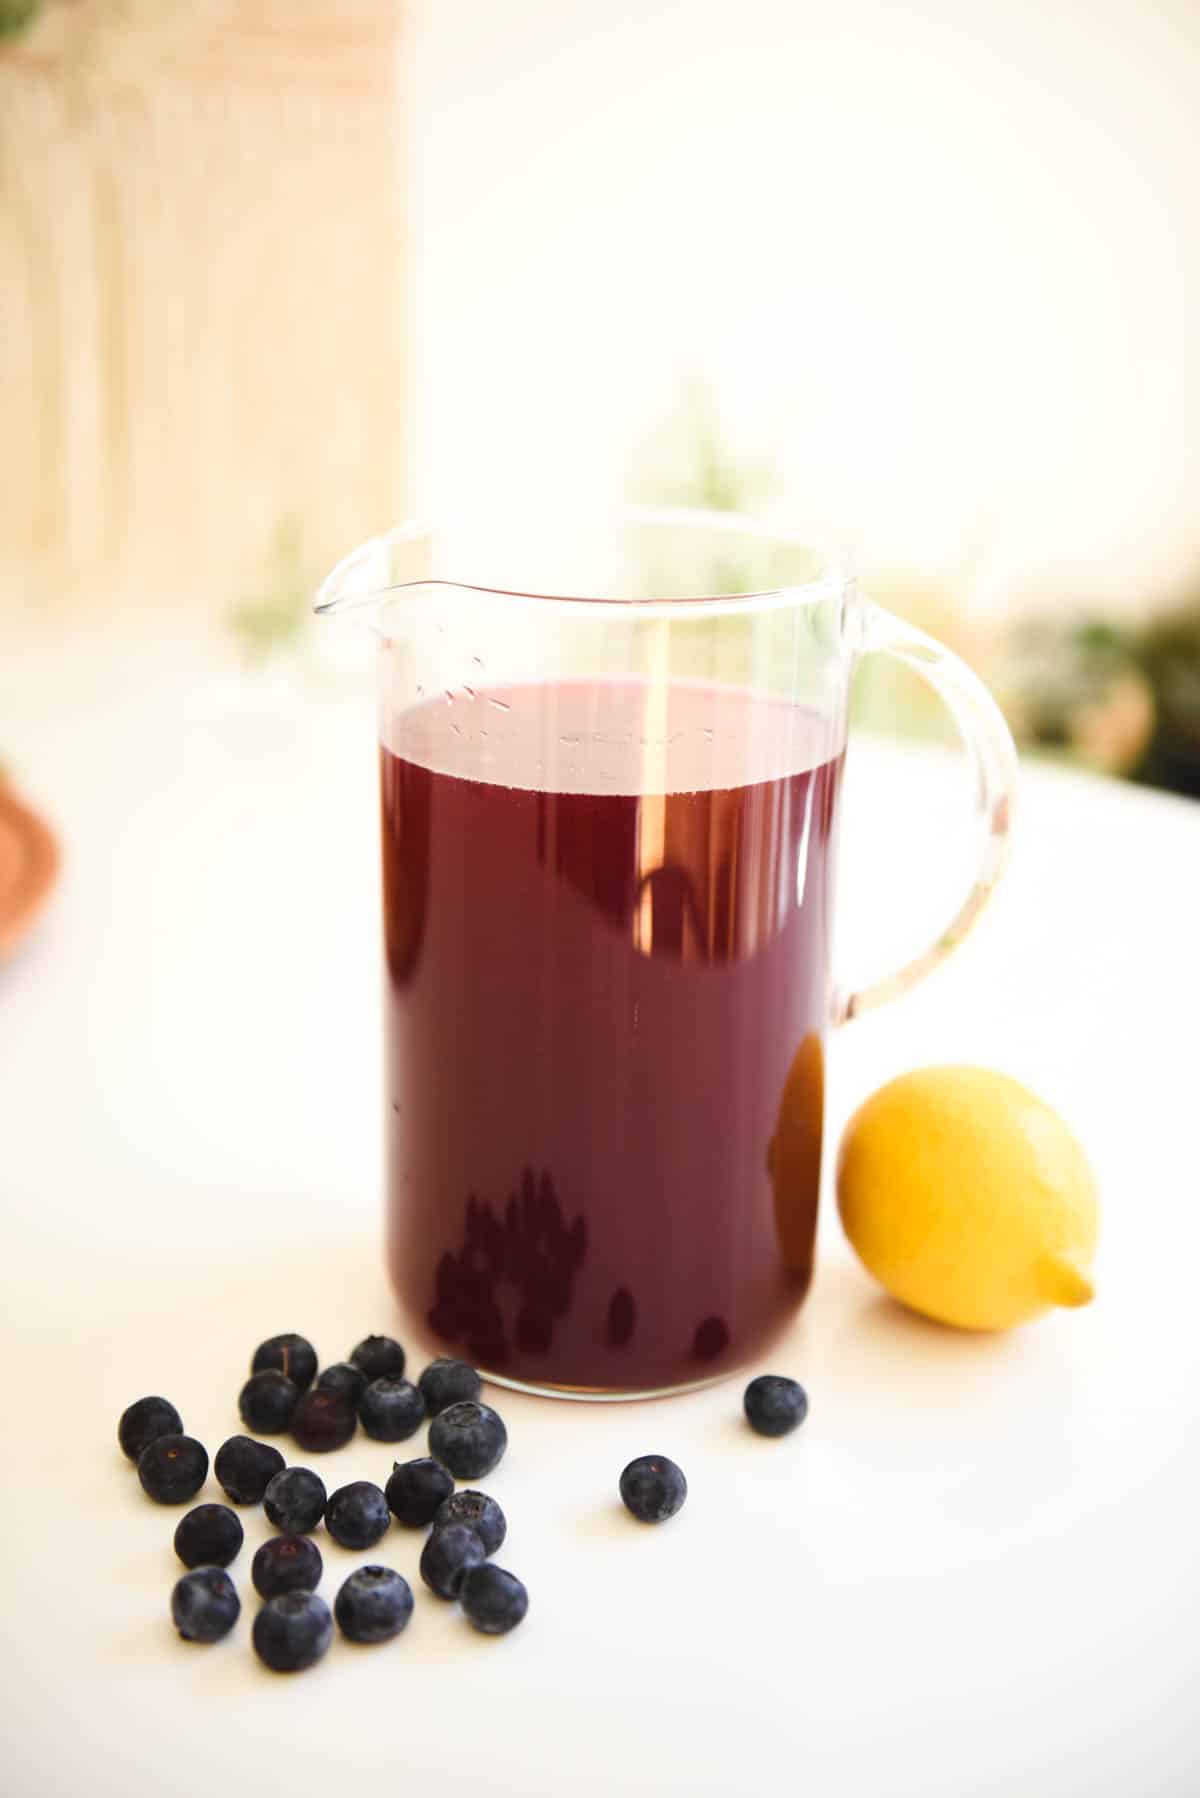 A lemonade flavored with blueberry in a pitcher on a table.